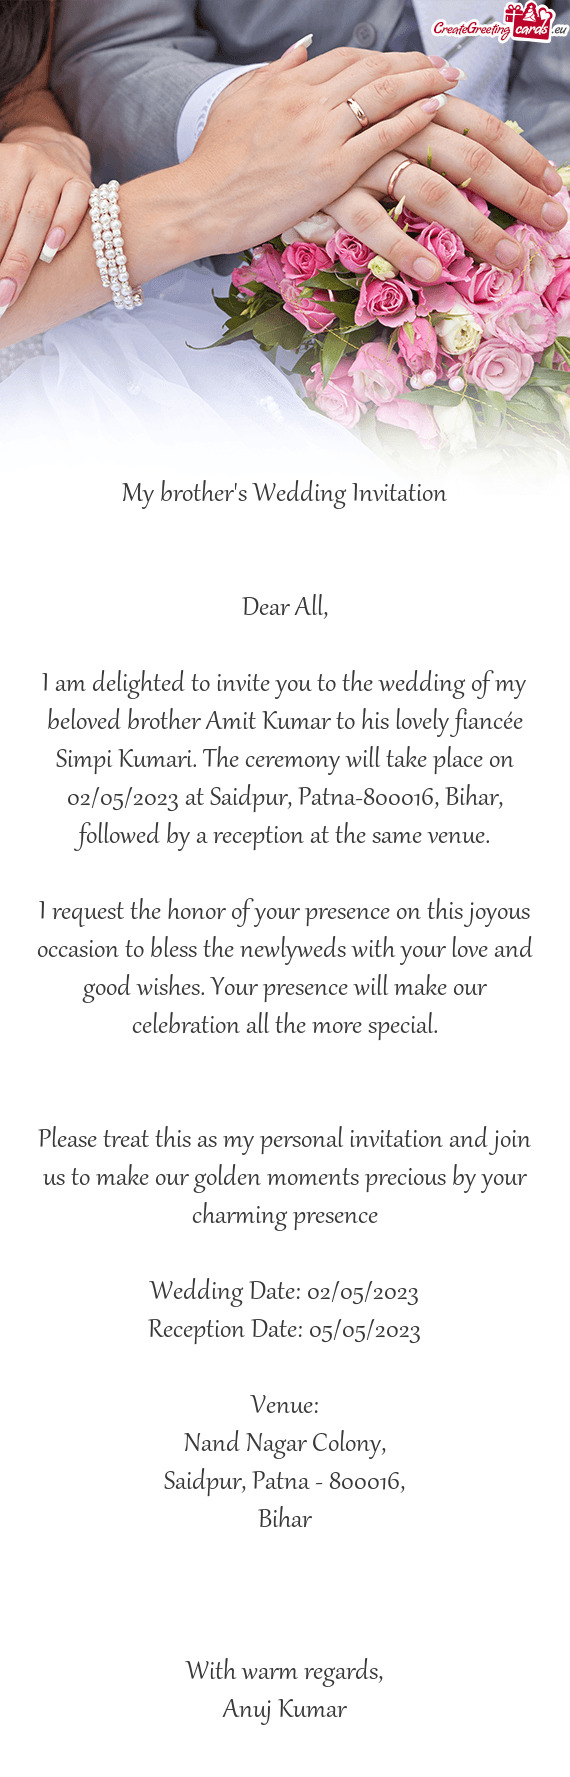 I am delighted to invite you to the wedding of my beloved brother Amit Kumar to his lovely fiancée